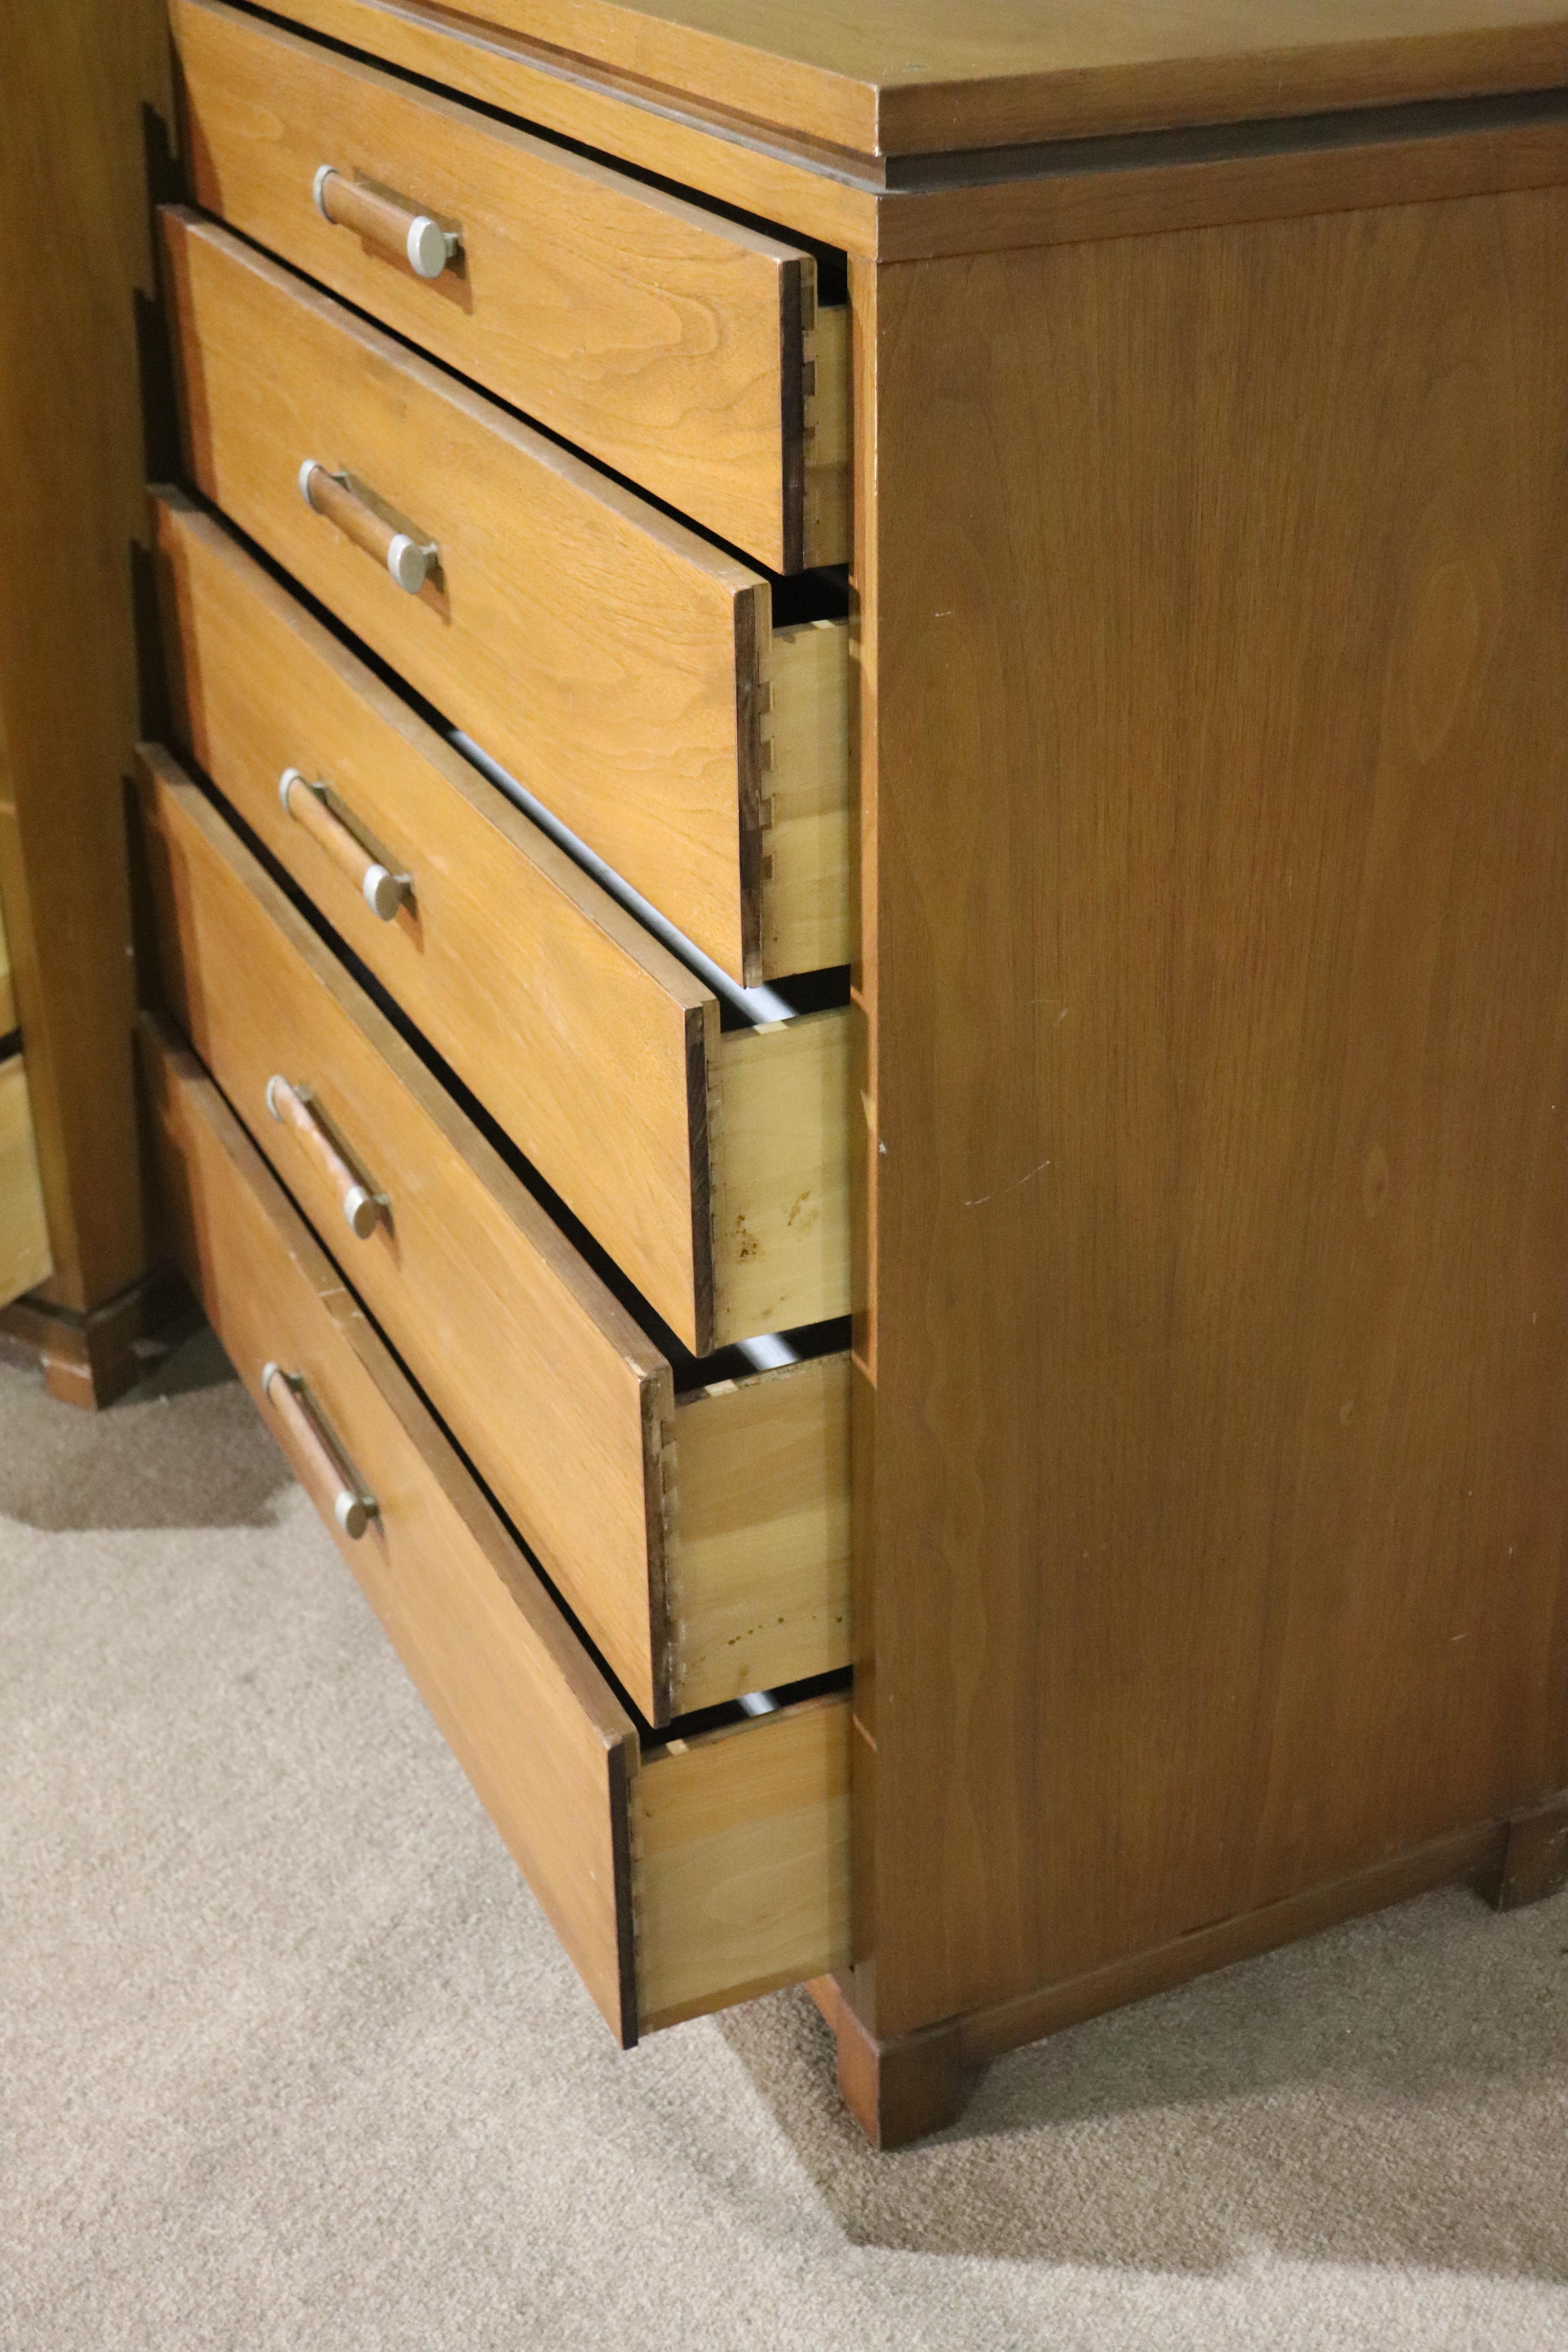 Tall chest of drawers by Ramseur Furniture Company. Five wide drawers with wood handles. 
* 2 dressers are available - listing is for 1 *
Please confirm location NY or NJ